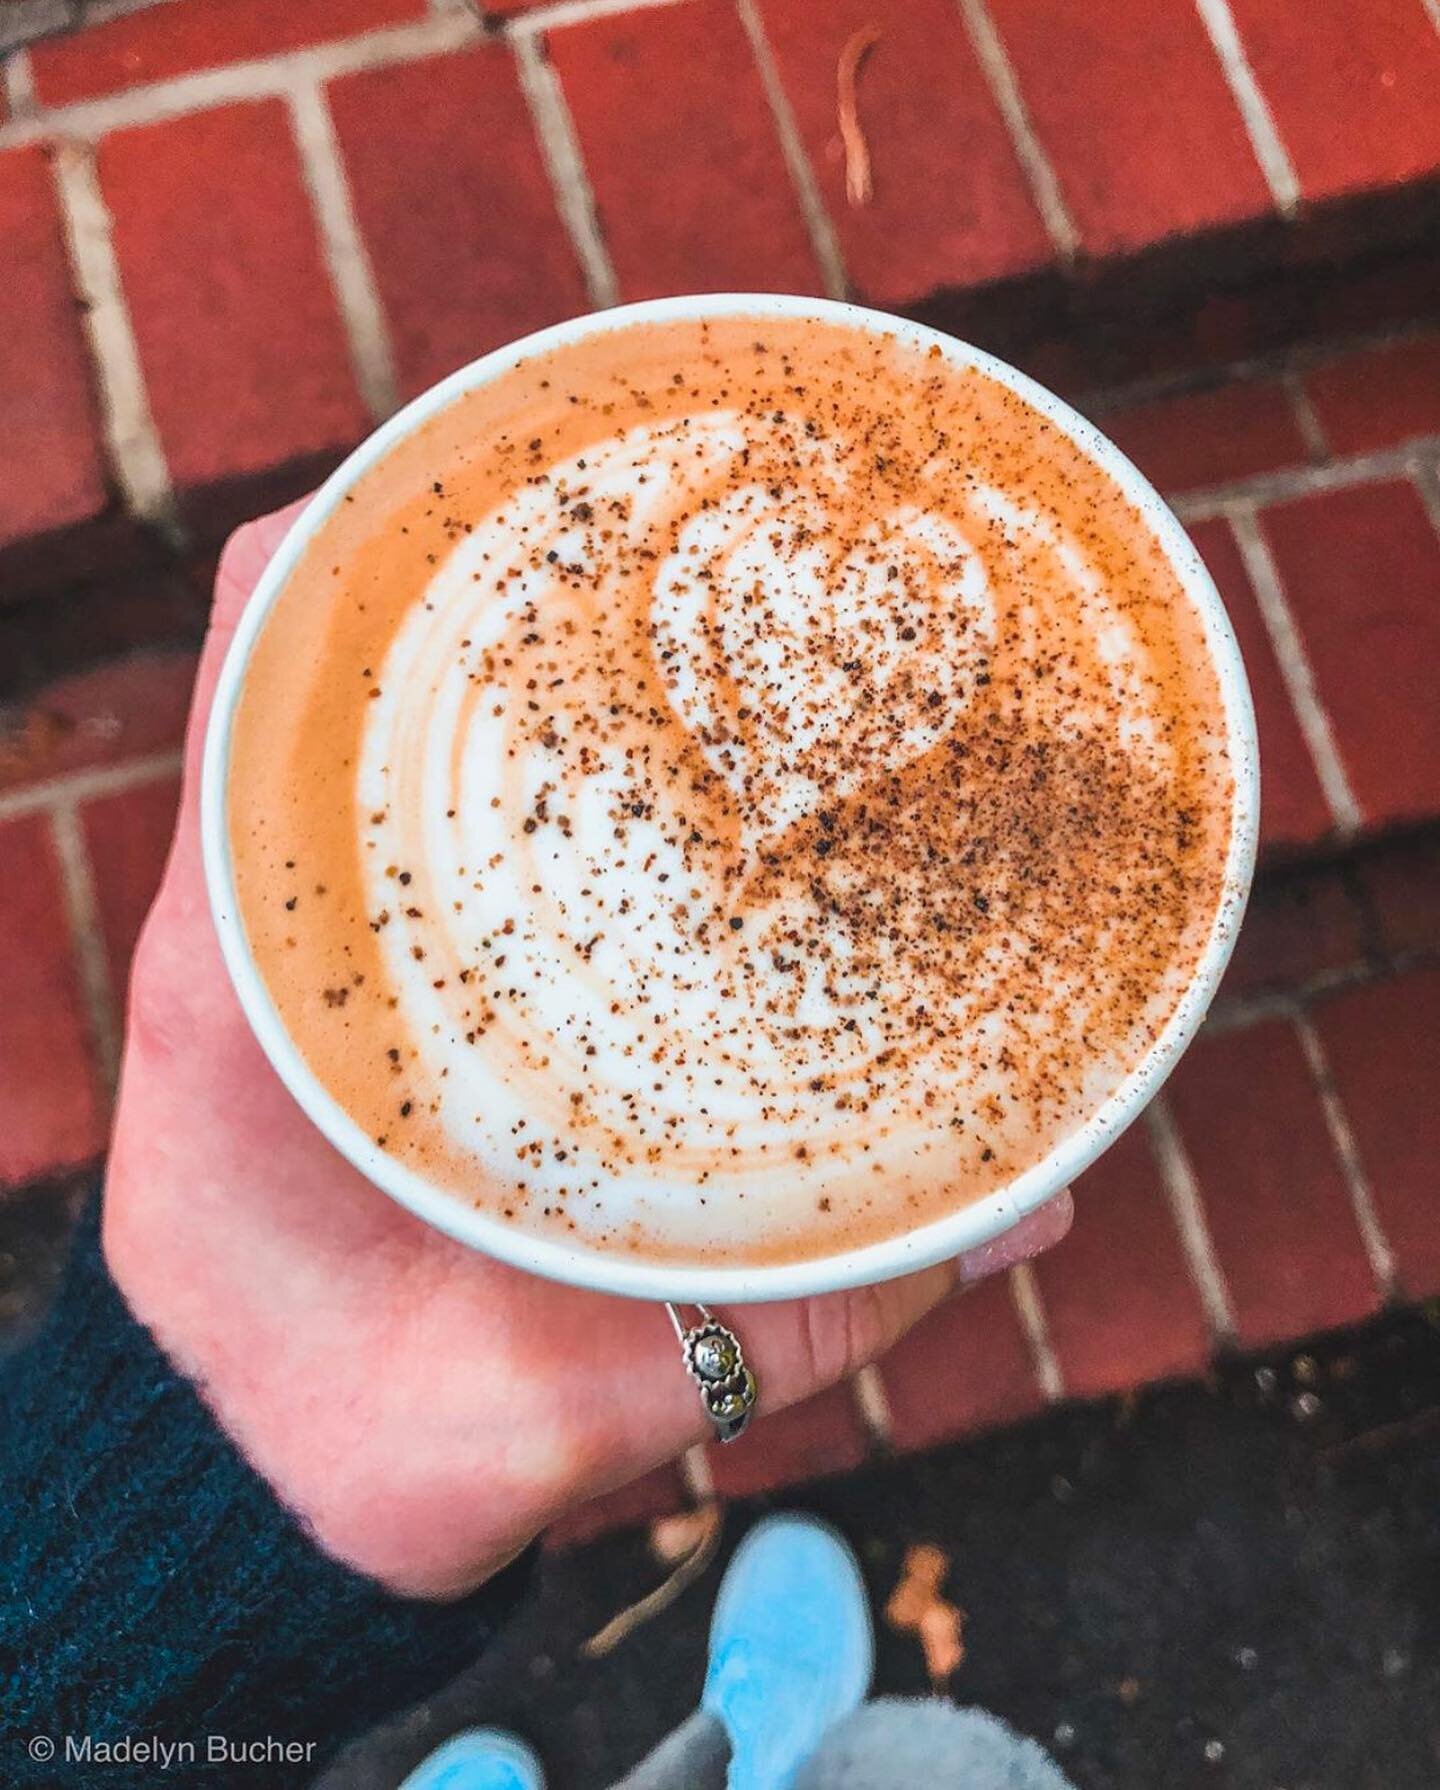 Our Black Pepper Maple Latte returns today! In honor of Hunger Awareness Month, 100% of its sales today will be donated to the DC Food Project.

1 in 5 children in DC struggle with hunger and inadequate access to food. The @dcfoodproject helps 1,000'